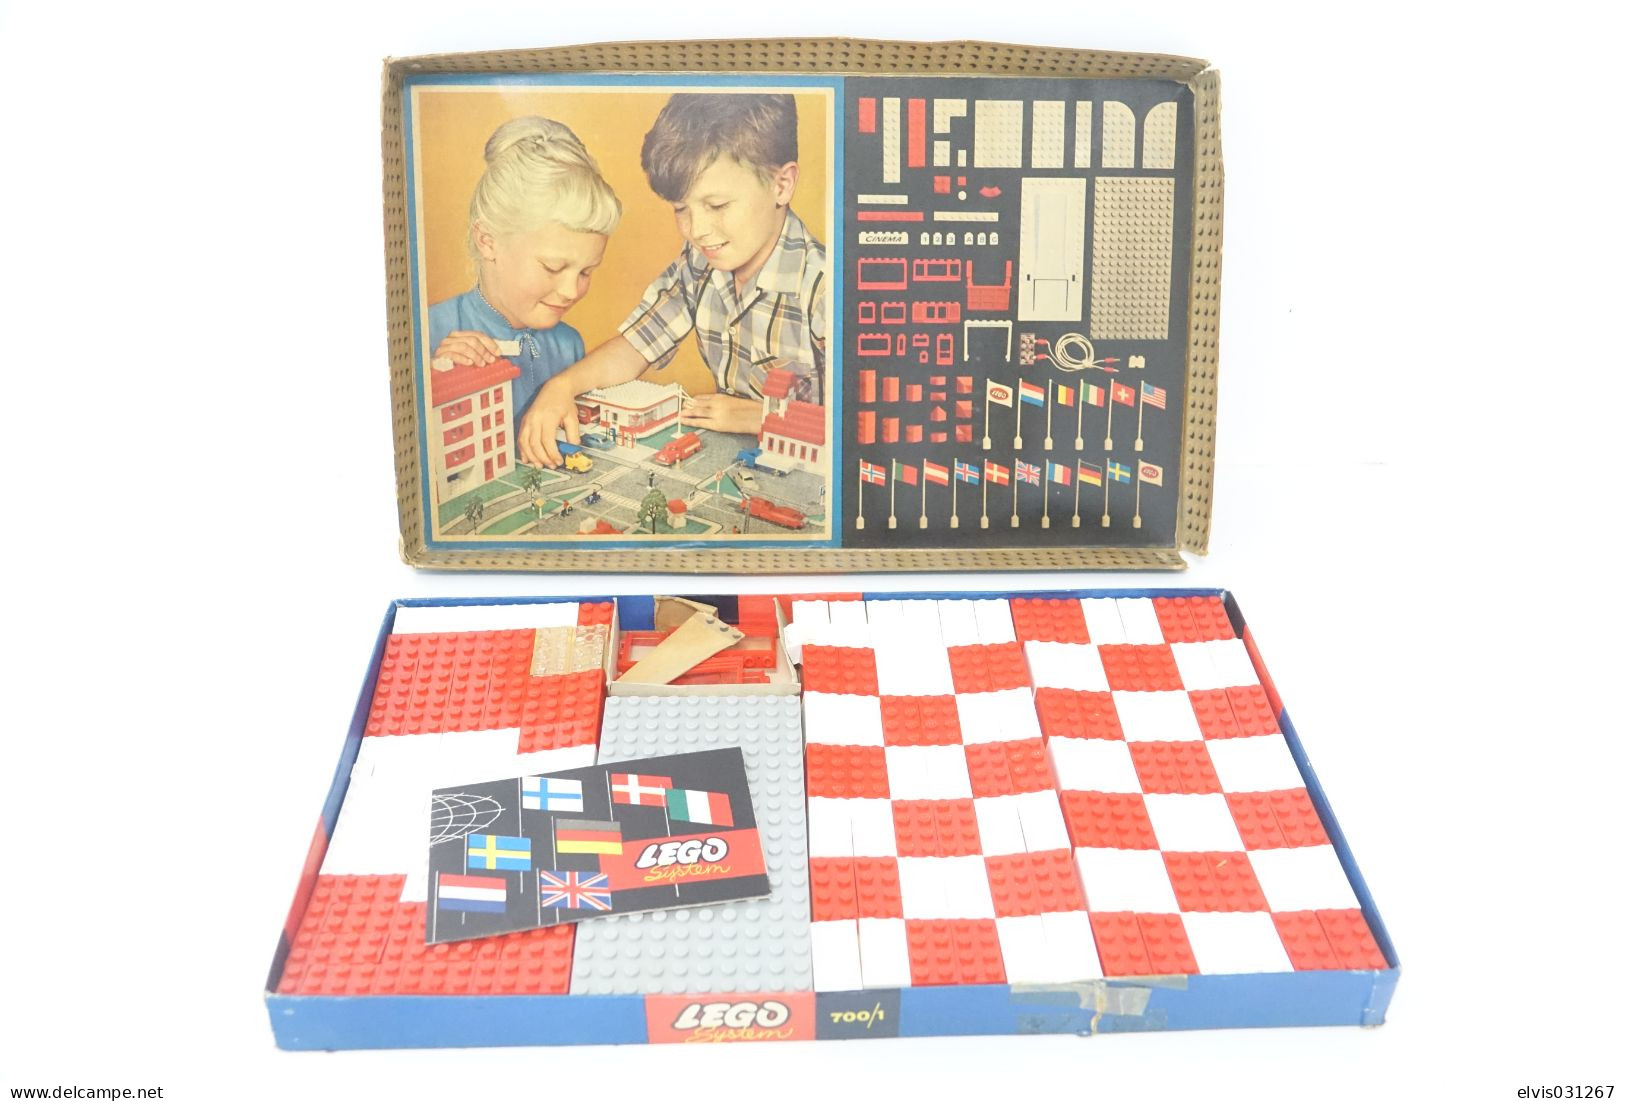 LEGO - 700/1 Gift Package (Lego Mursten) Extremely Rare 1st Edition - Collector Item - Original Lego 1956 - Vintage - Catalogues